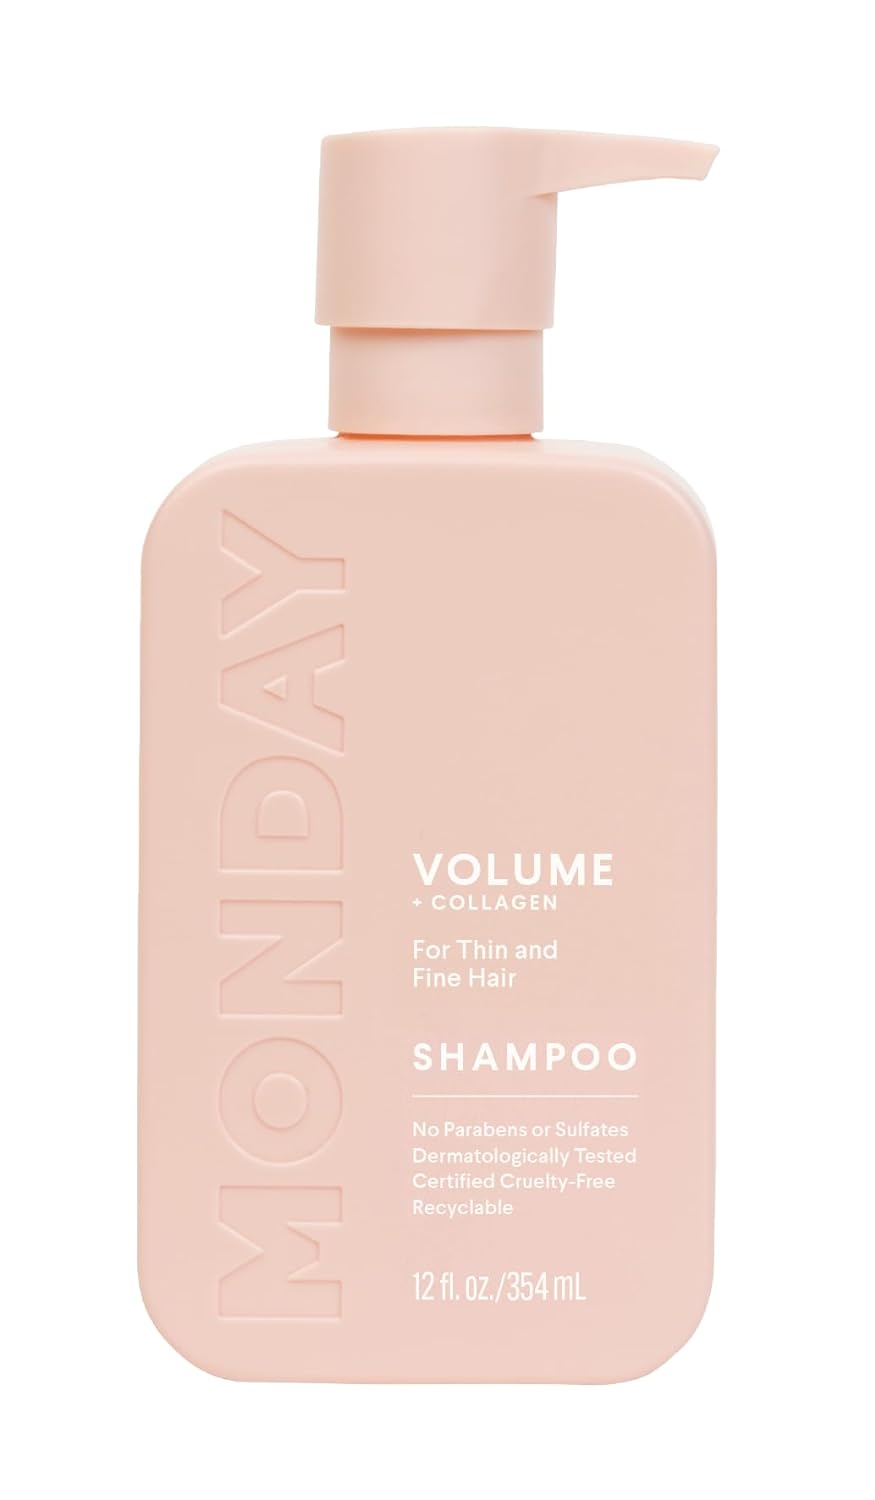 Monday Haircare Volume Shampoo 887Ml Bulk Pack (Amazon Exclusive), For Thin, Fine, And Oily Hair, Made From Coconut Oil, Ginger Extract,  Vitamin E, 100% Recyclable Bottles